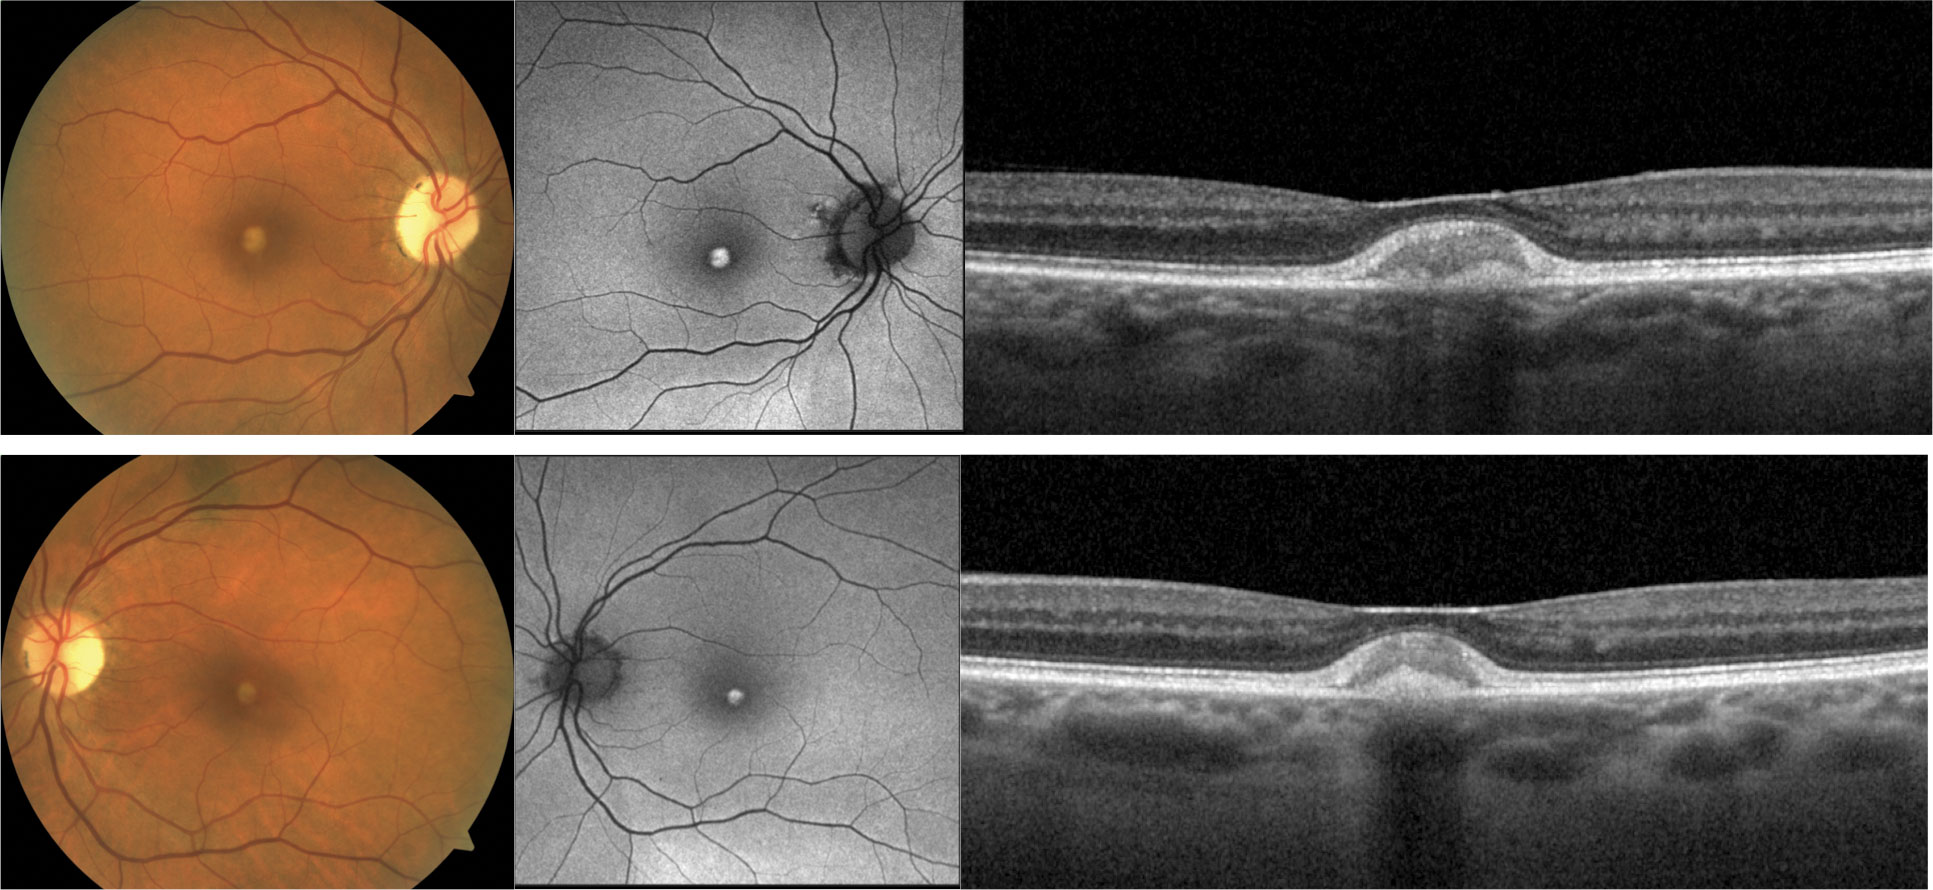 A 69-year-old white female with AOVD has bilateral, circular, yellow, central vitelliform lesions (left). These lesions are hyper-autofluorescent on FAF (middle) and present on OCT as reflective subretinal deposits between the RPE and the photoreceptors (right). The patient presented with good visual acuity of 20/30 OD and OS.